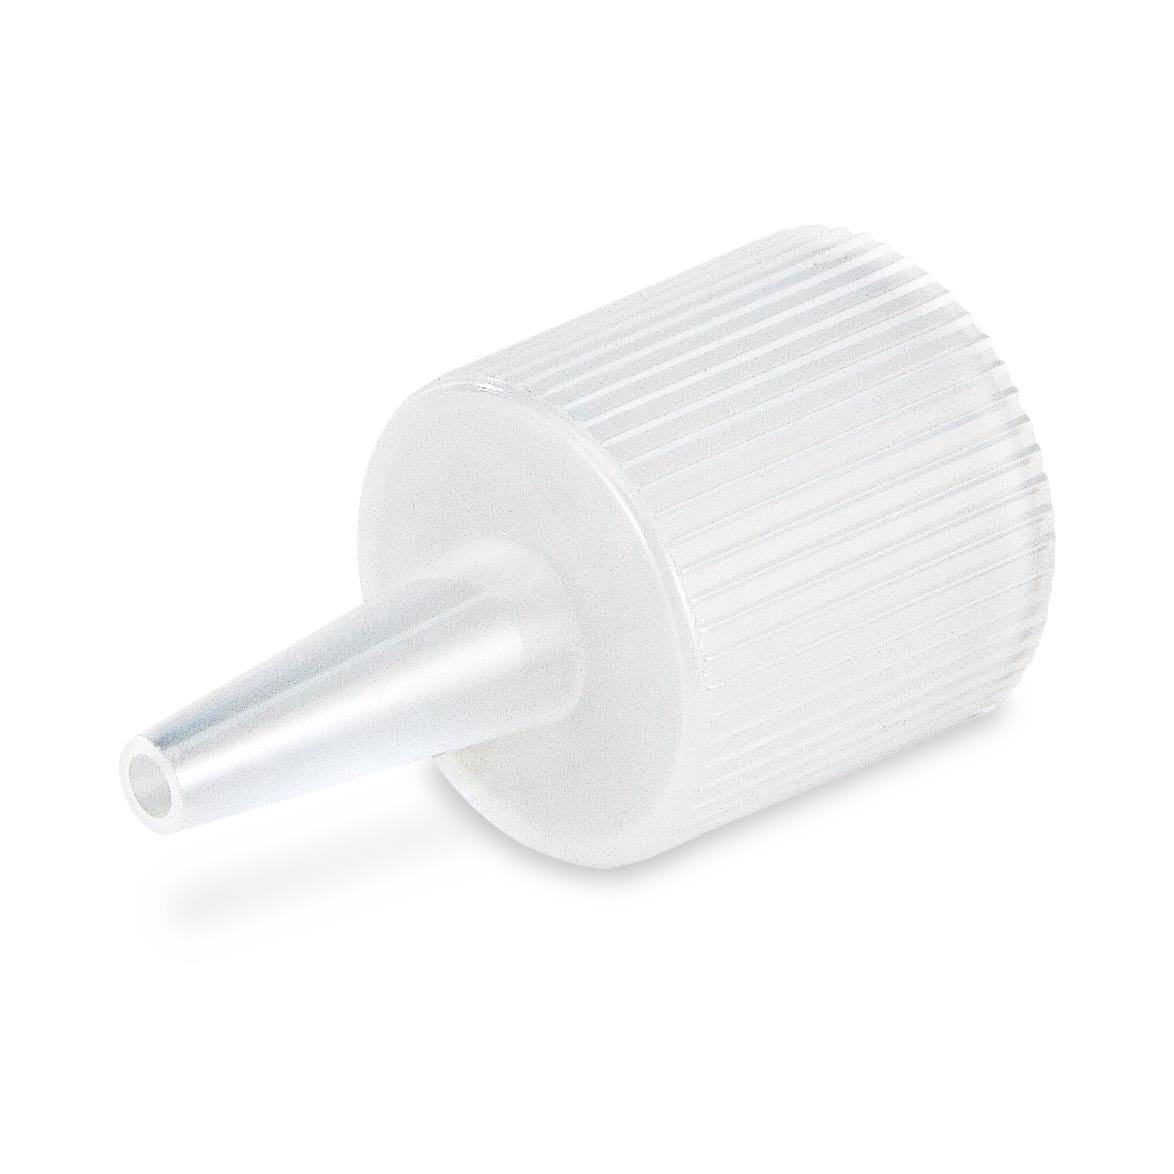 Case - Tubing Adapter, 22 mm I.D. x 5-7 mm Tapered Nipple- 50/Case